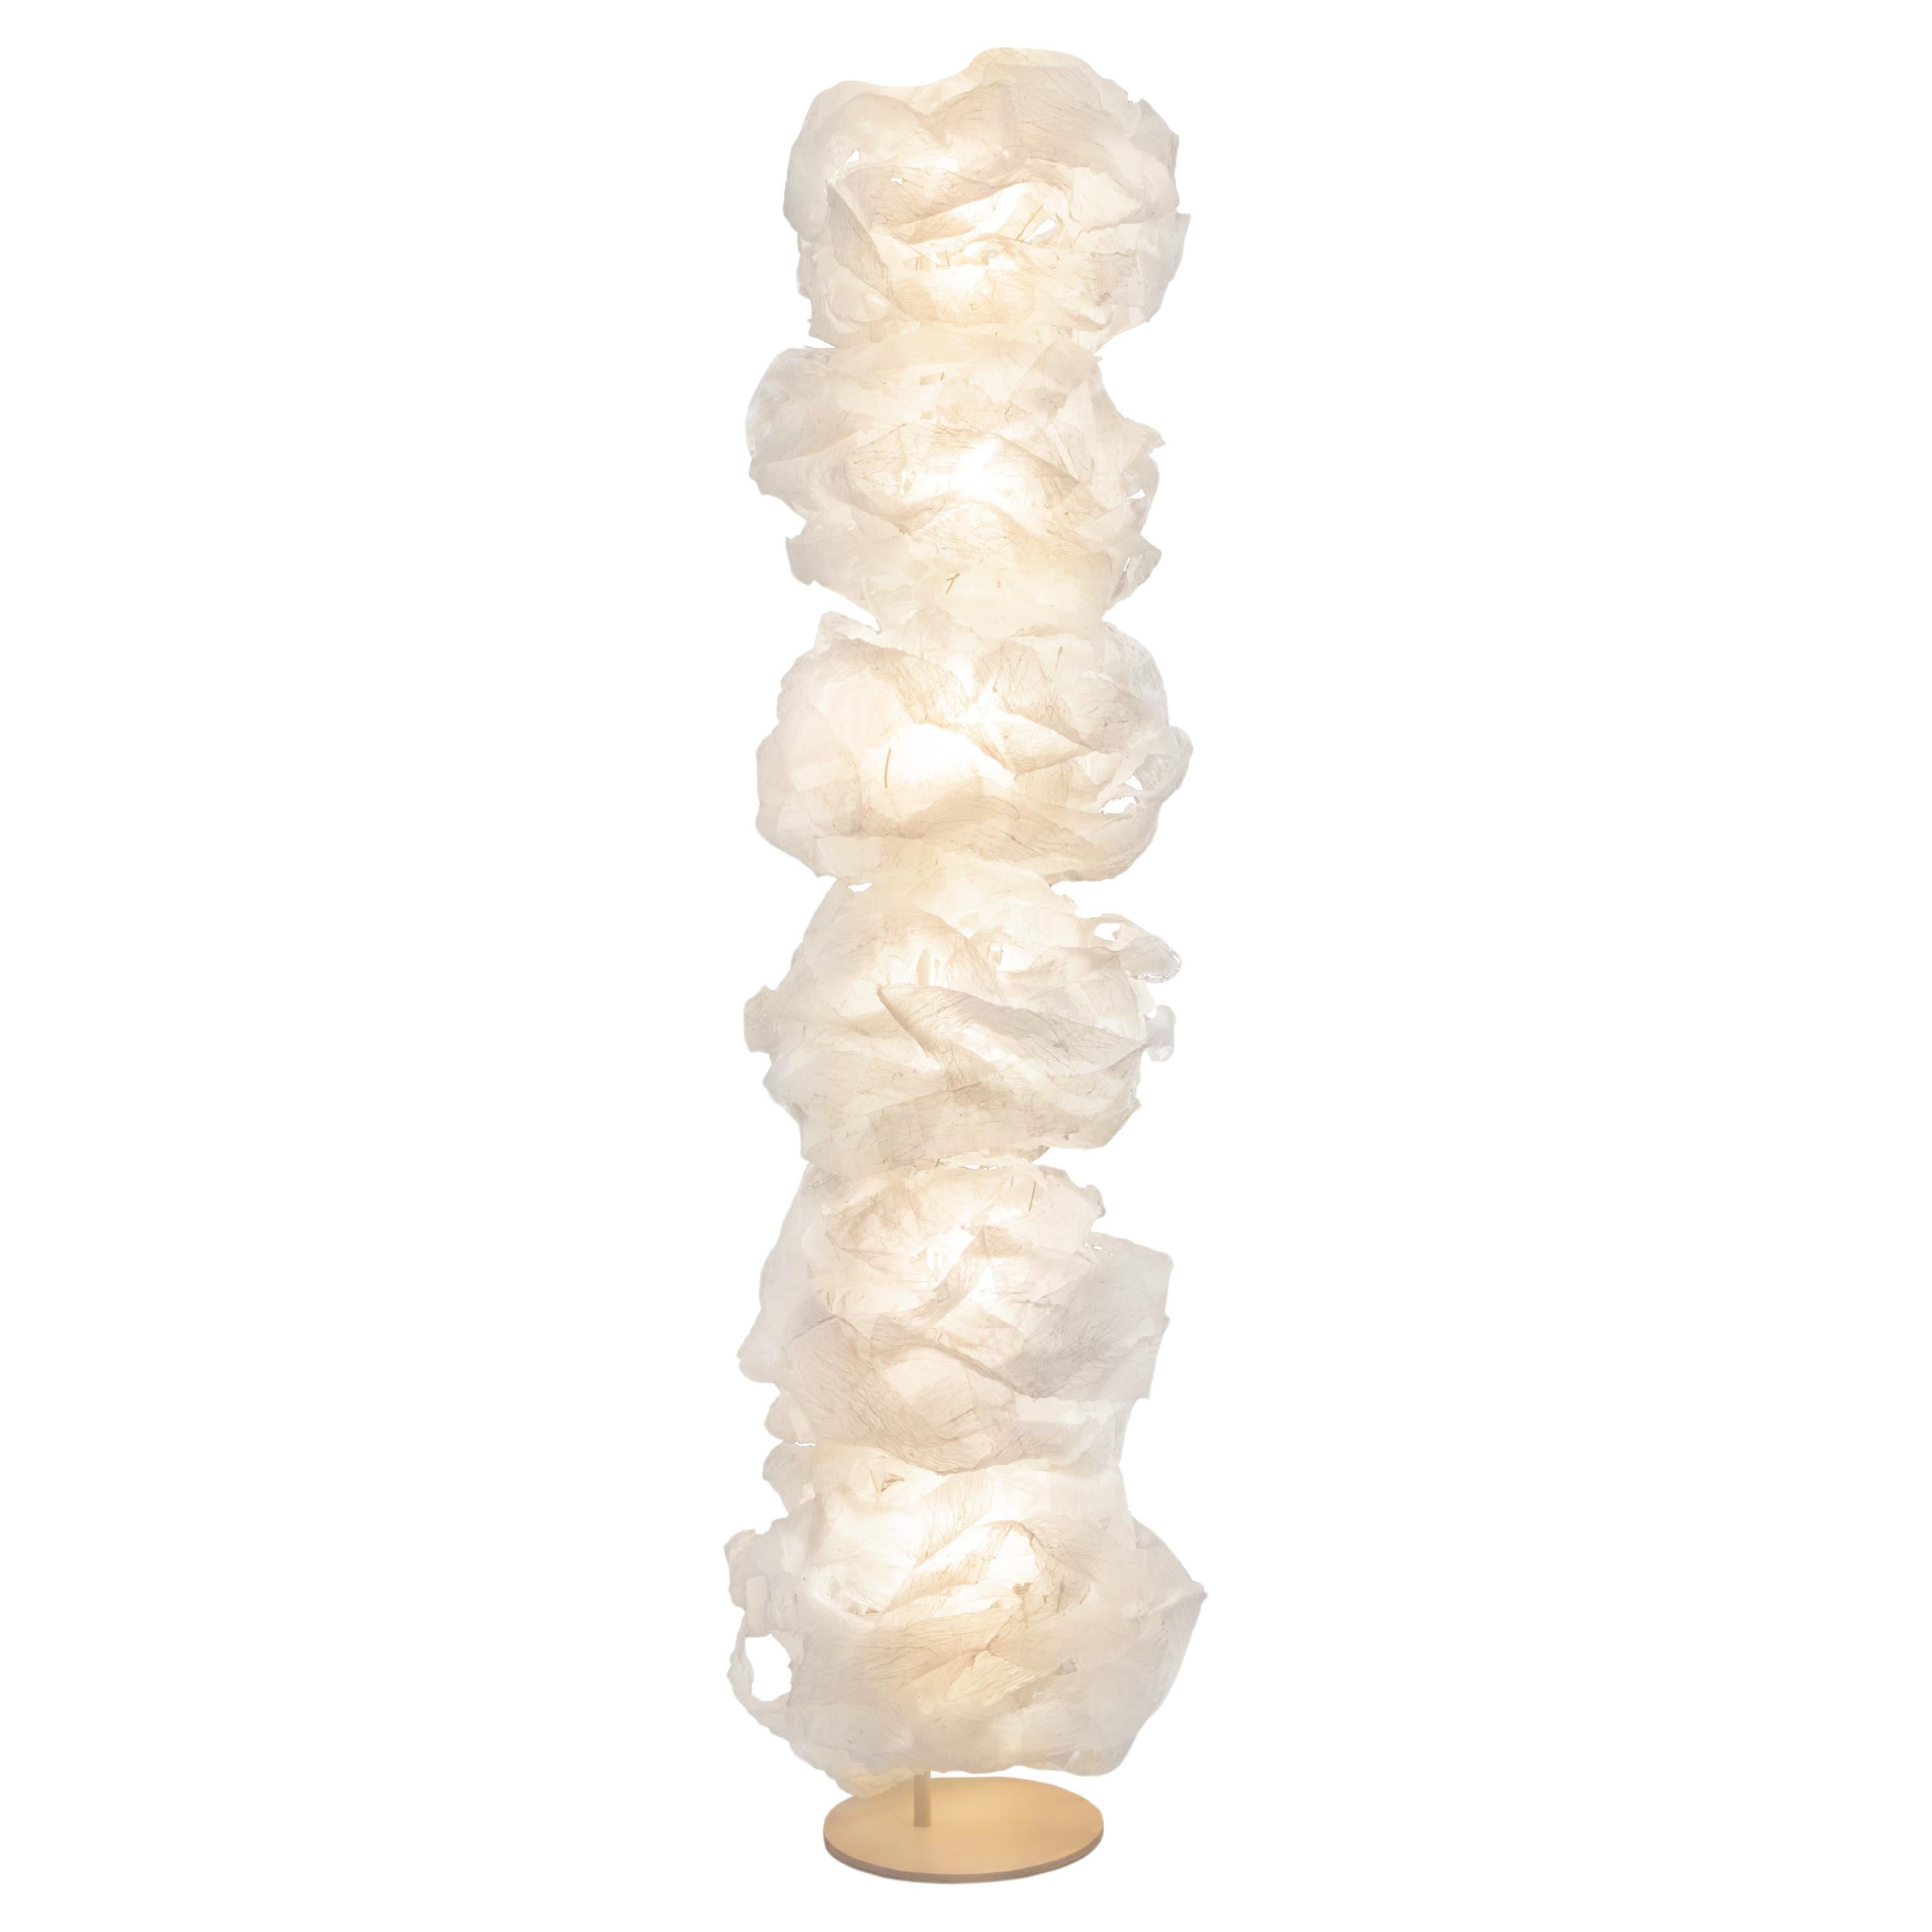 Transcendence Tower 6 - Hand-Crafted Diaphanous Cloud Freestanding Floor light